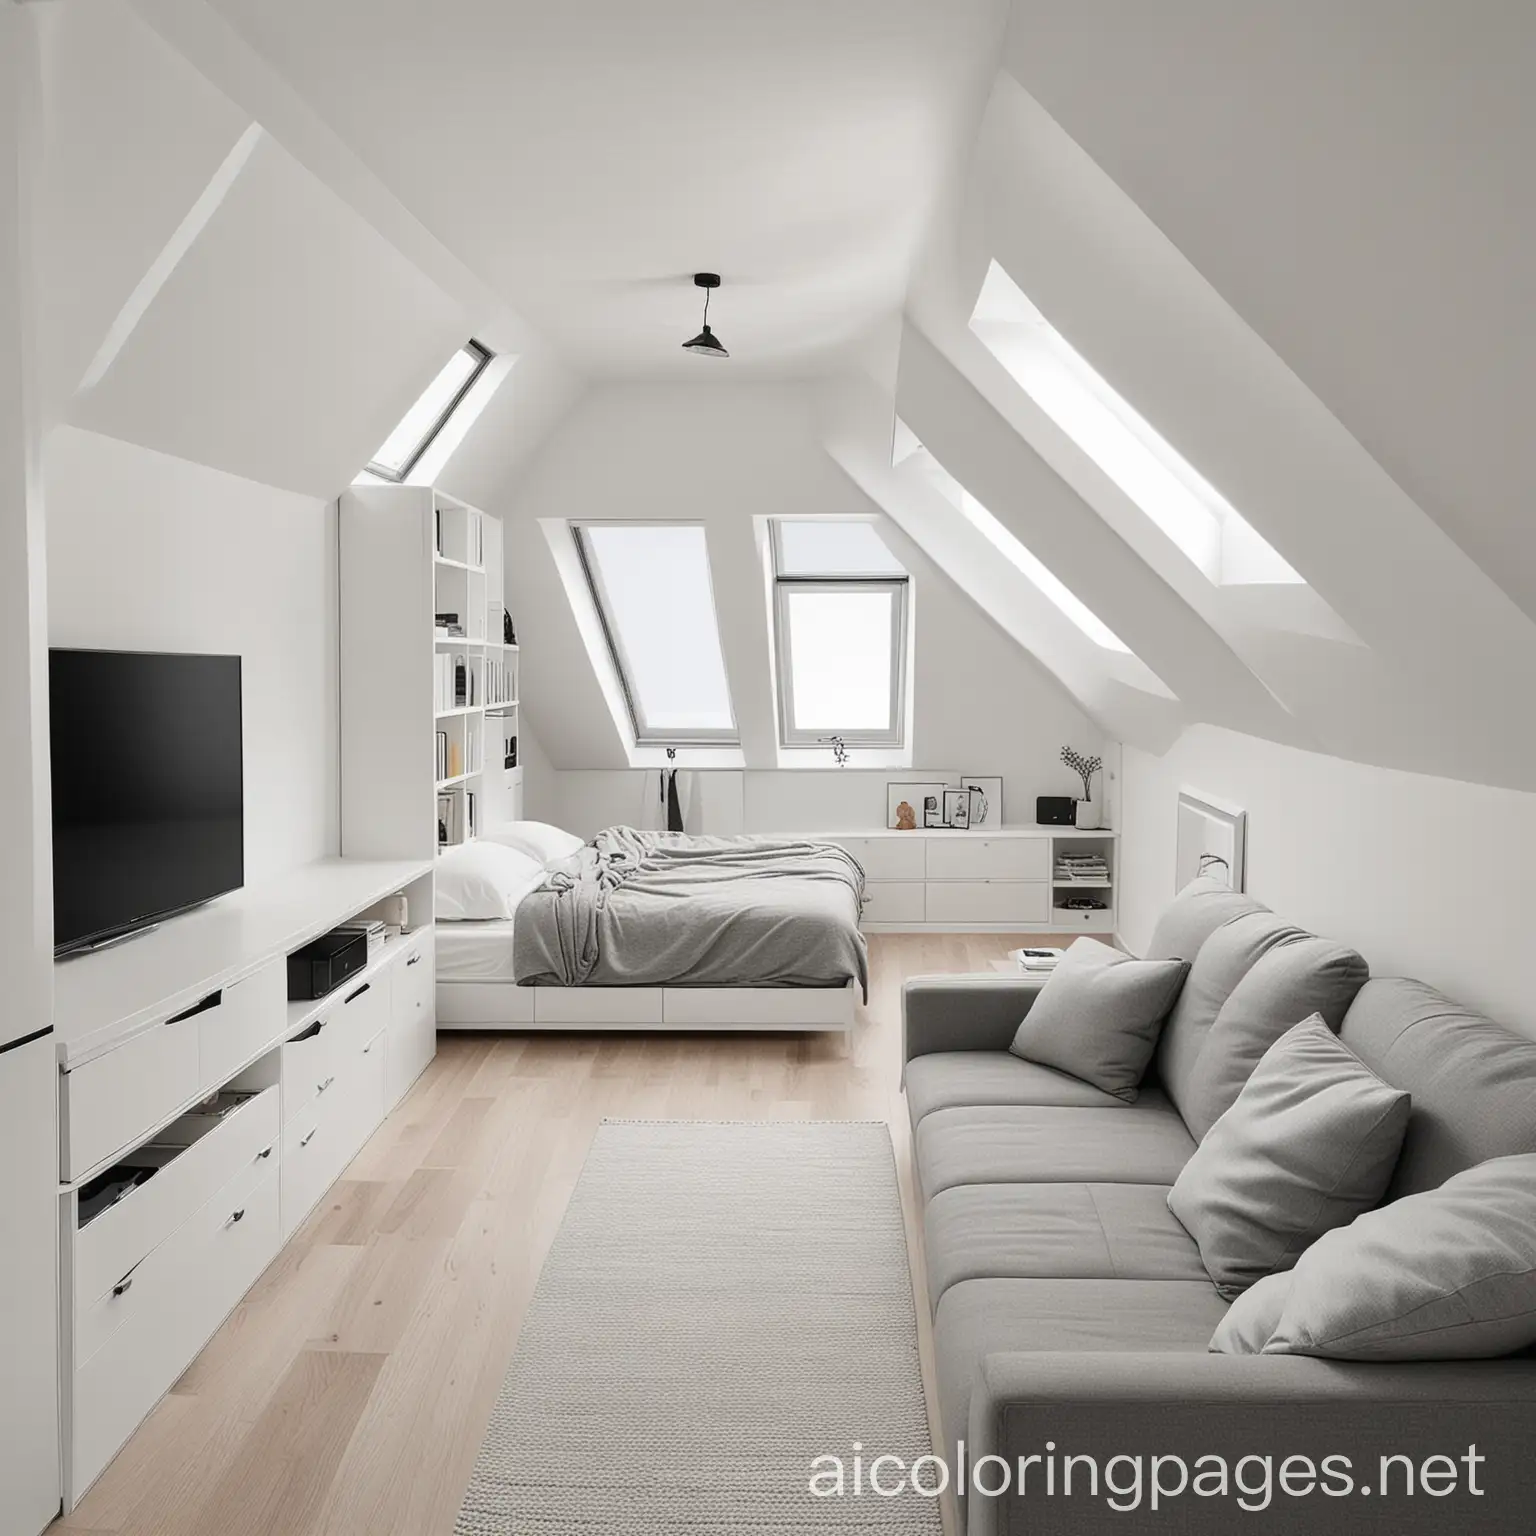 Cozy-Attic-Bedroom-with-KingSized-Bed-and-Storage